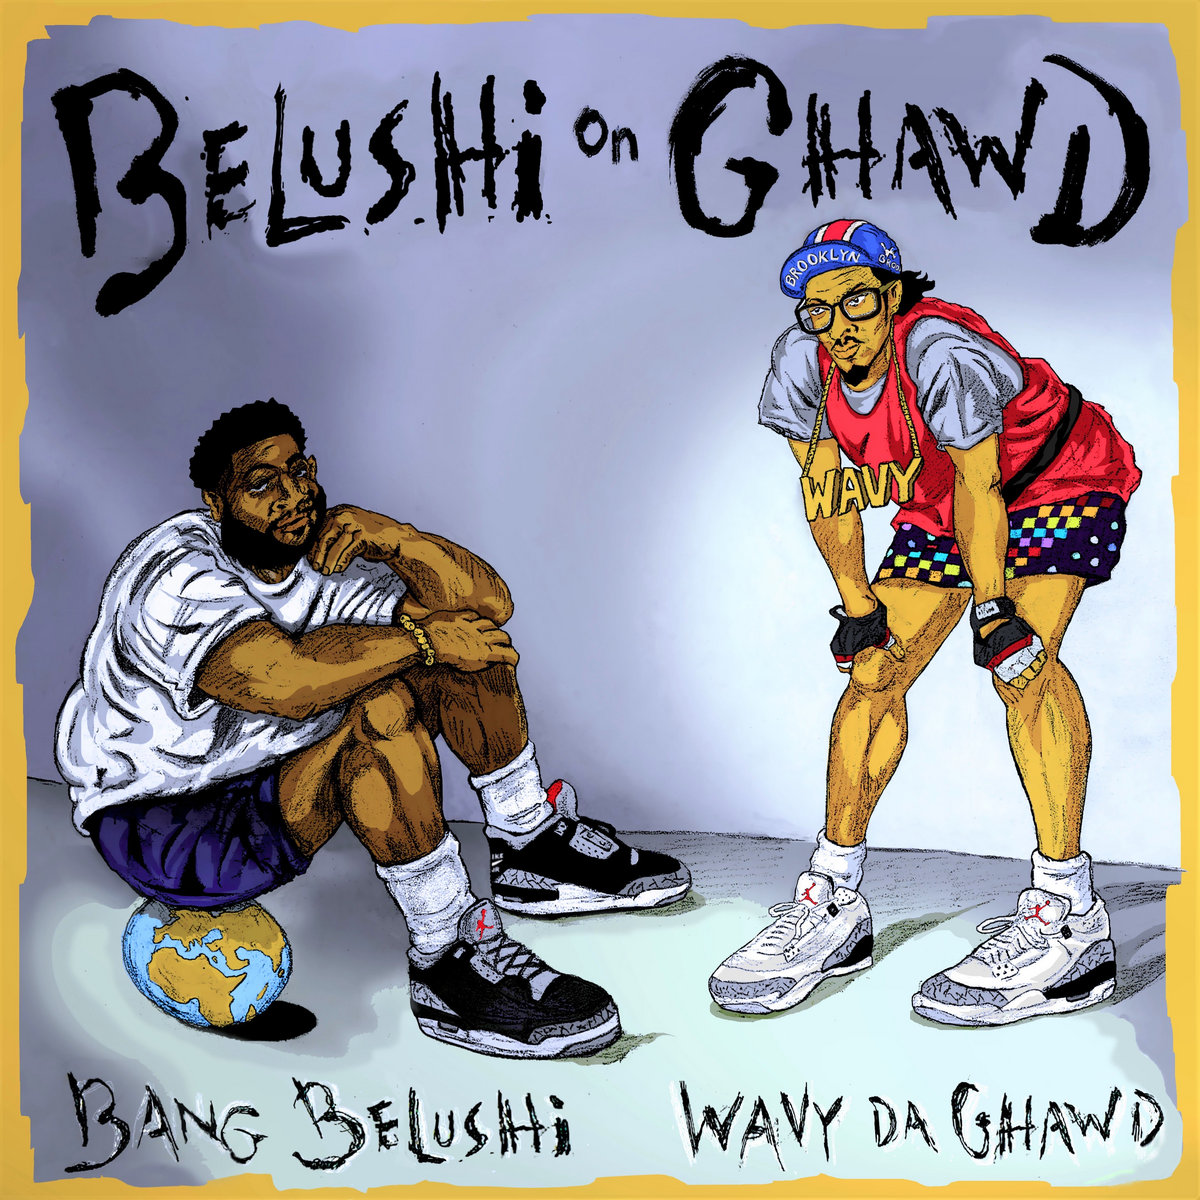 'BELUSHI ON GHWAD' 💥 @GhawdWavy x @Bang_Belushi Yo actually to see da name 'Wavy Da Ghawd' alyways is enough to just dig that one. Really fw his productions since a long time. Just check em out on this one featuring @ProDillinger @Rim_Davillins & others: belushionghawd.bandcamp.com/album/belushi-…